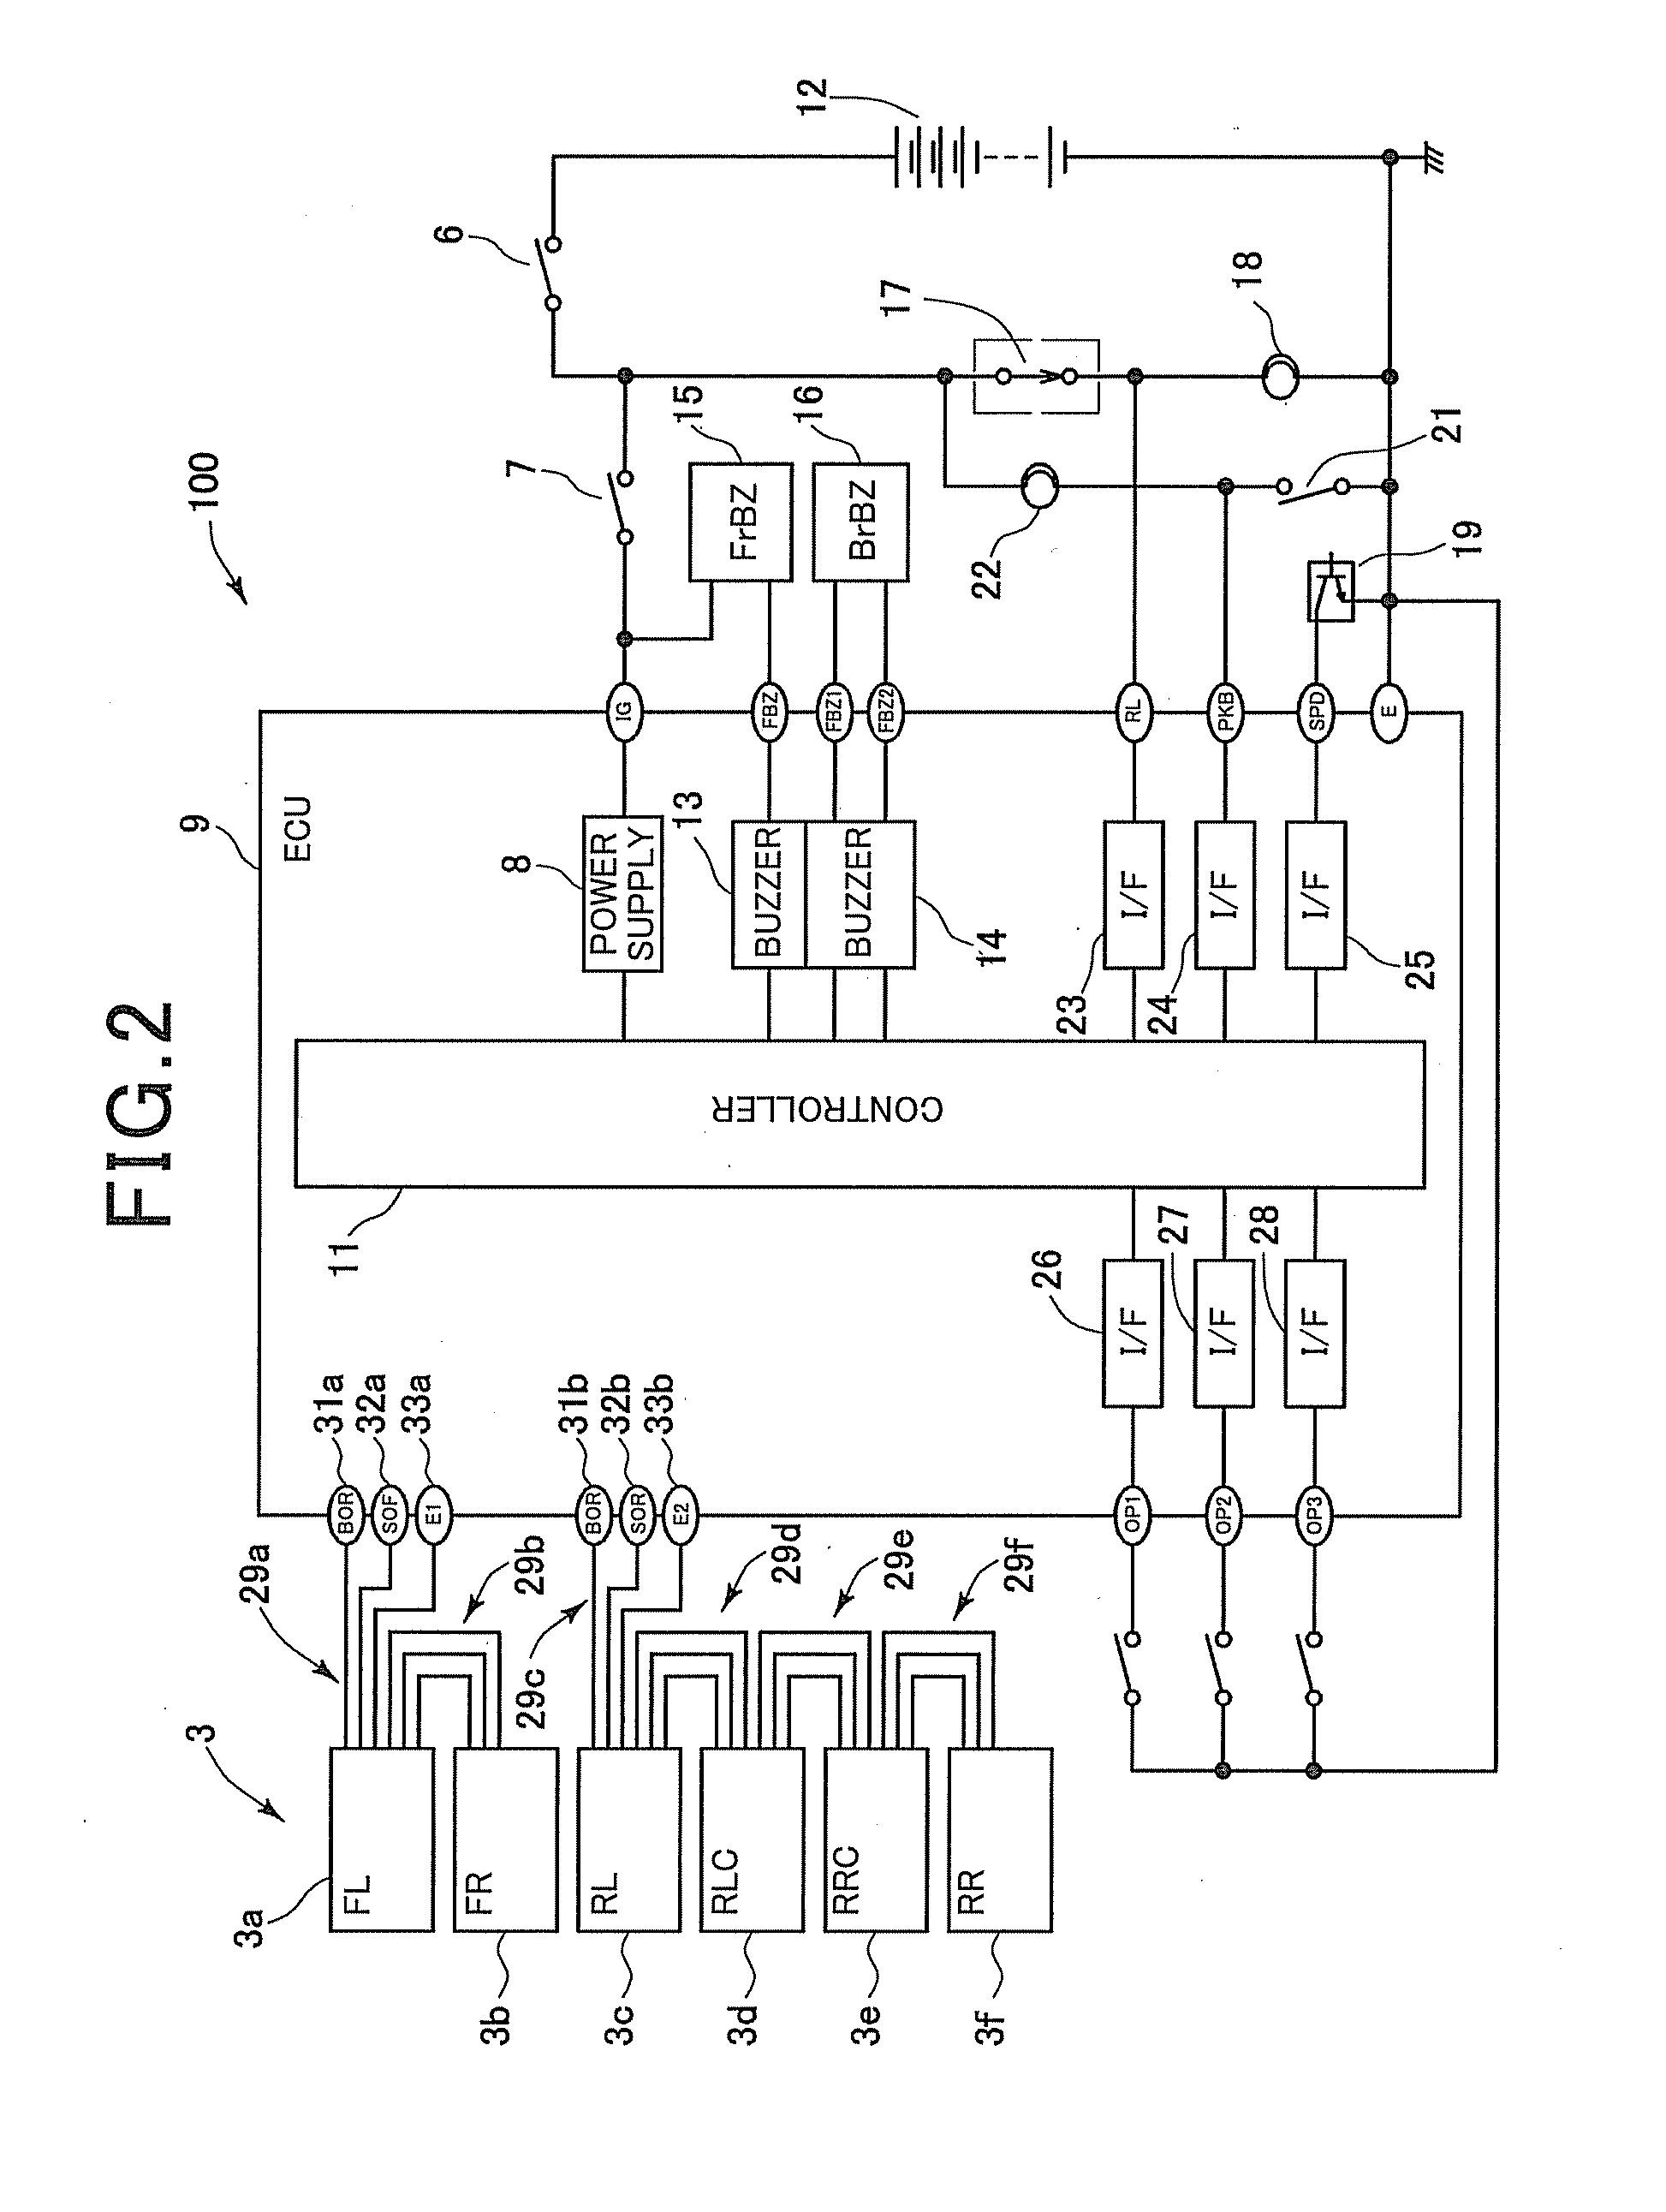 Distance sensor for vehicle with electrical connector